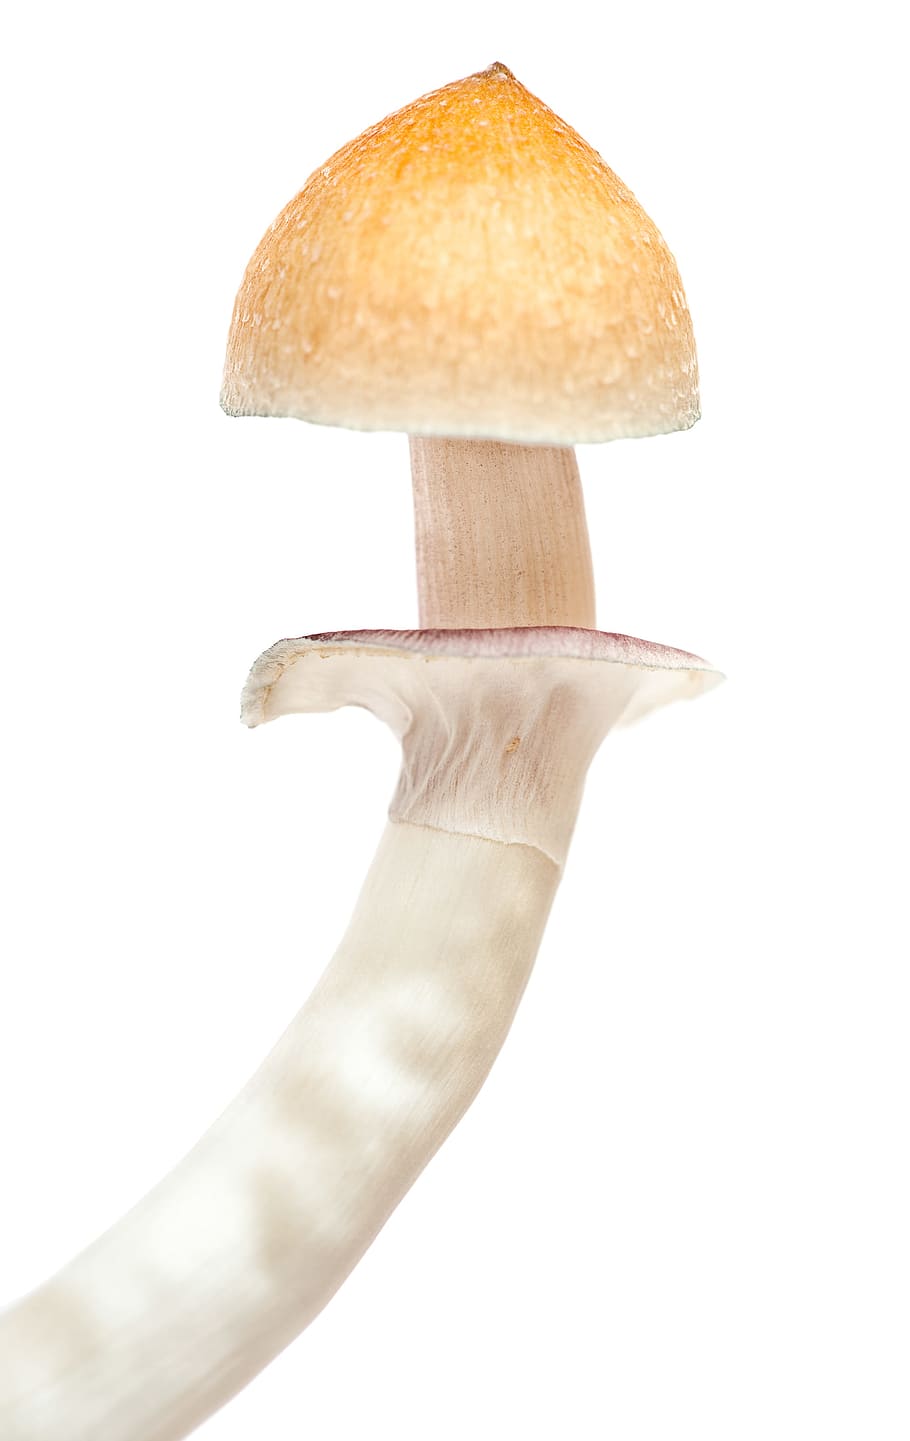 mushroom, isolated, vegetarian, delicacy, nobody, natural, clump, white, brown, gourmet